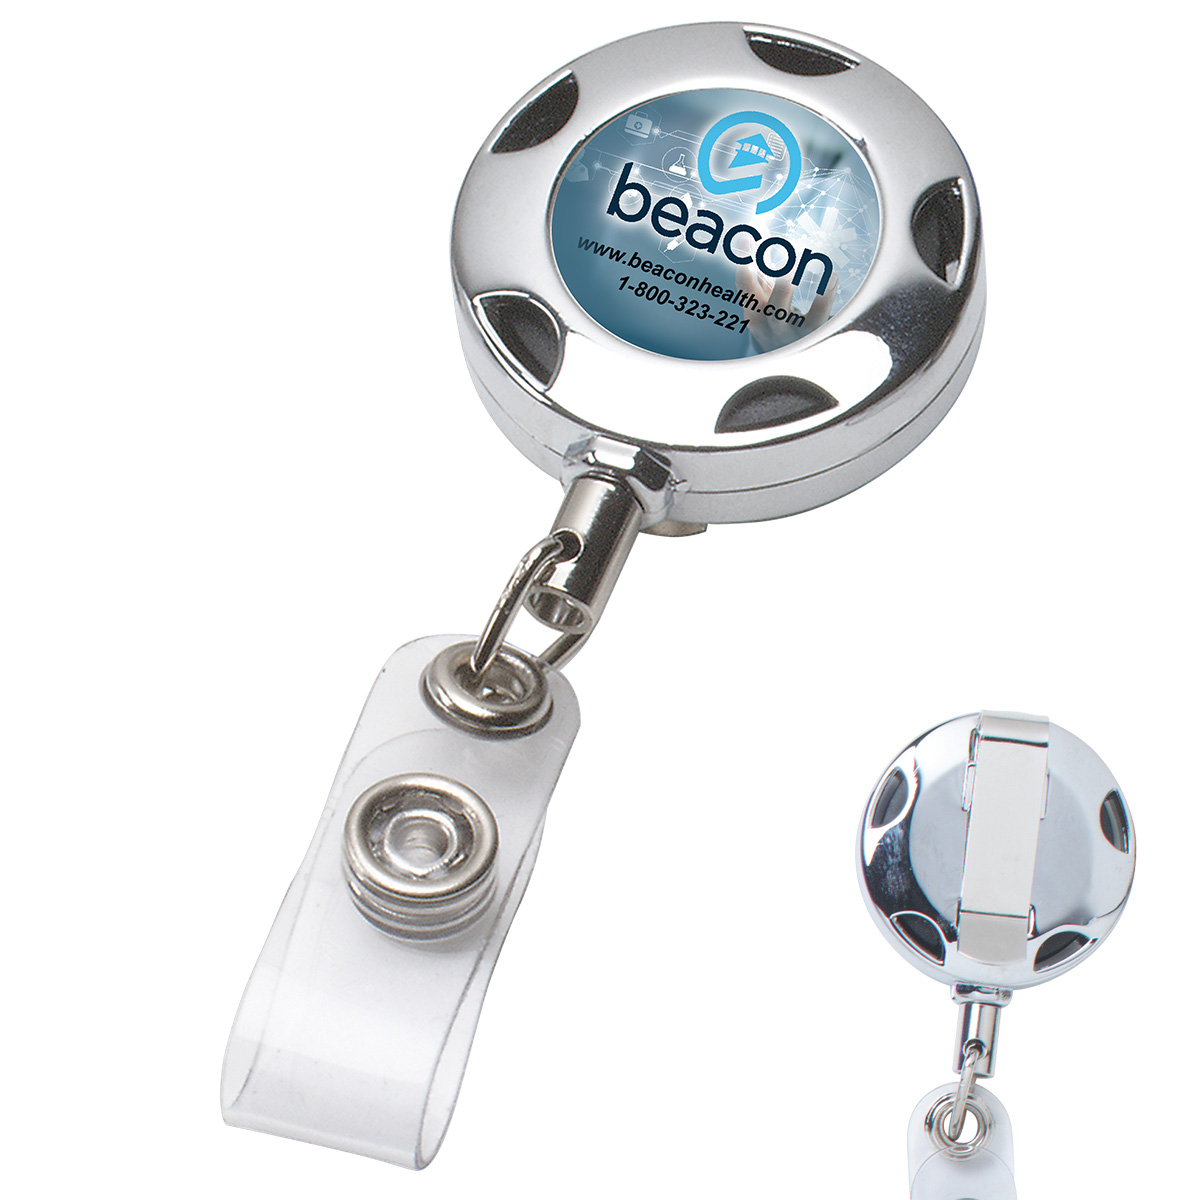 32” Cord Round Chrome Solid Metal Sport Retractable Badge Reel & Badge Holder with Full Colour Vinyl Label Imprint*